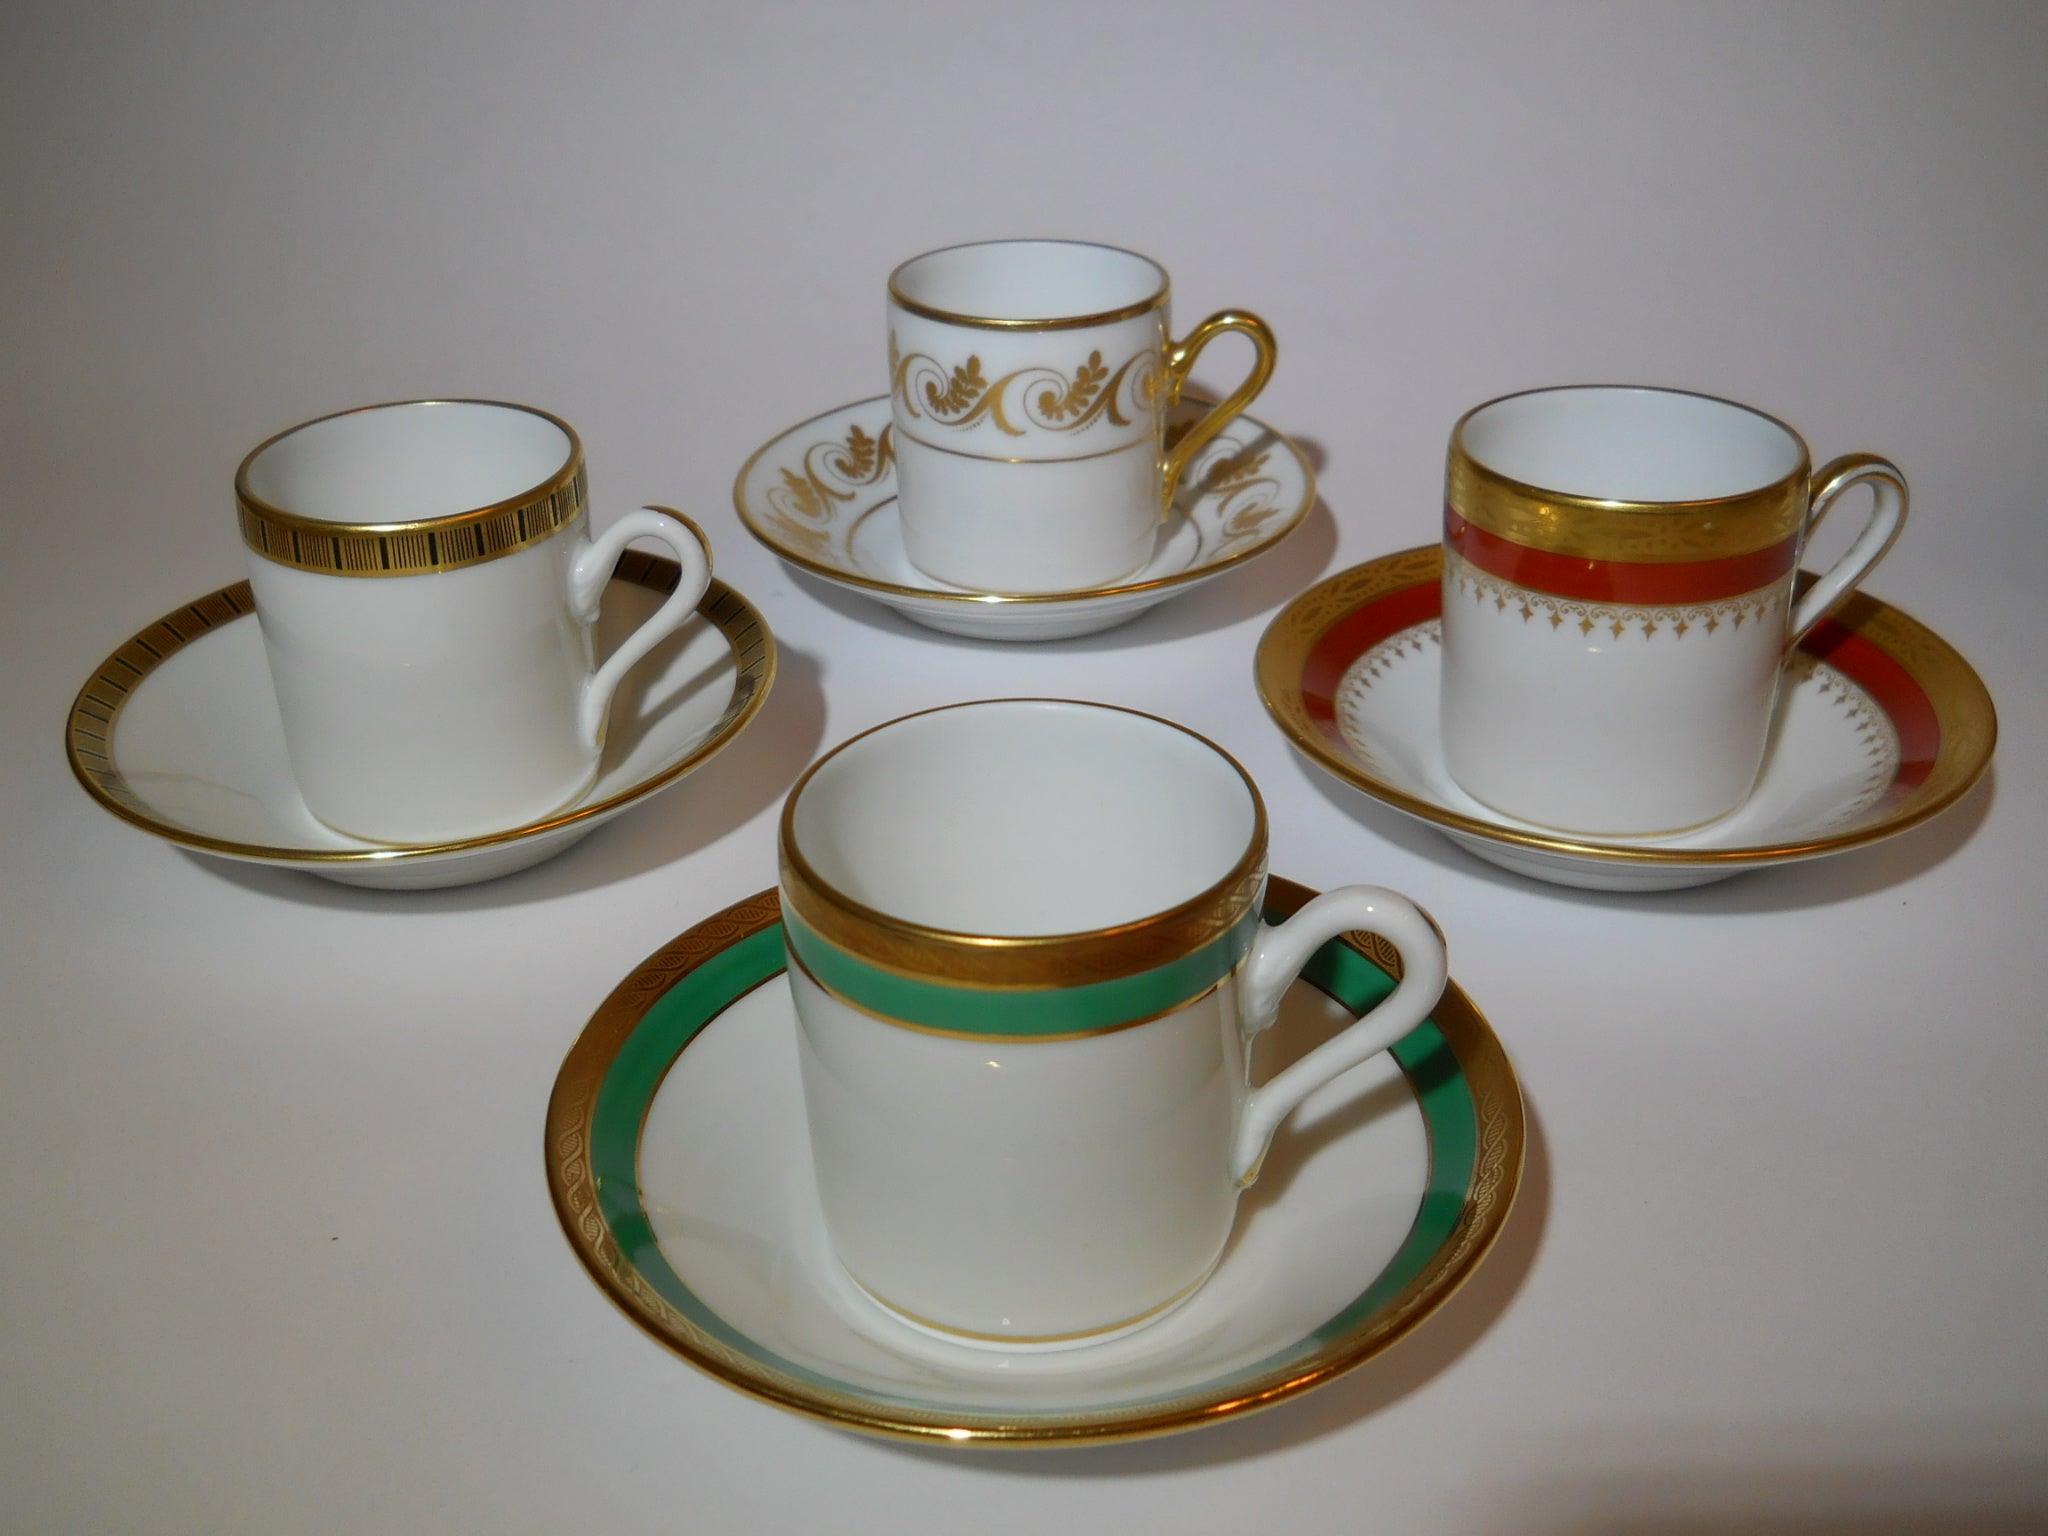 Floral vintage espresso cups made in Italy.